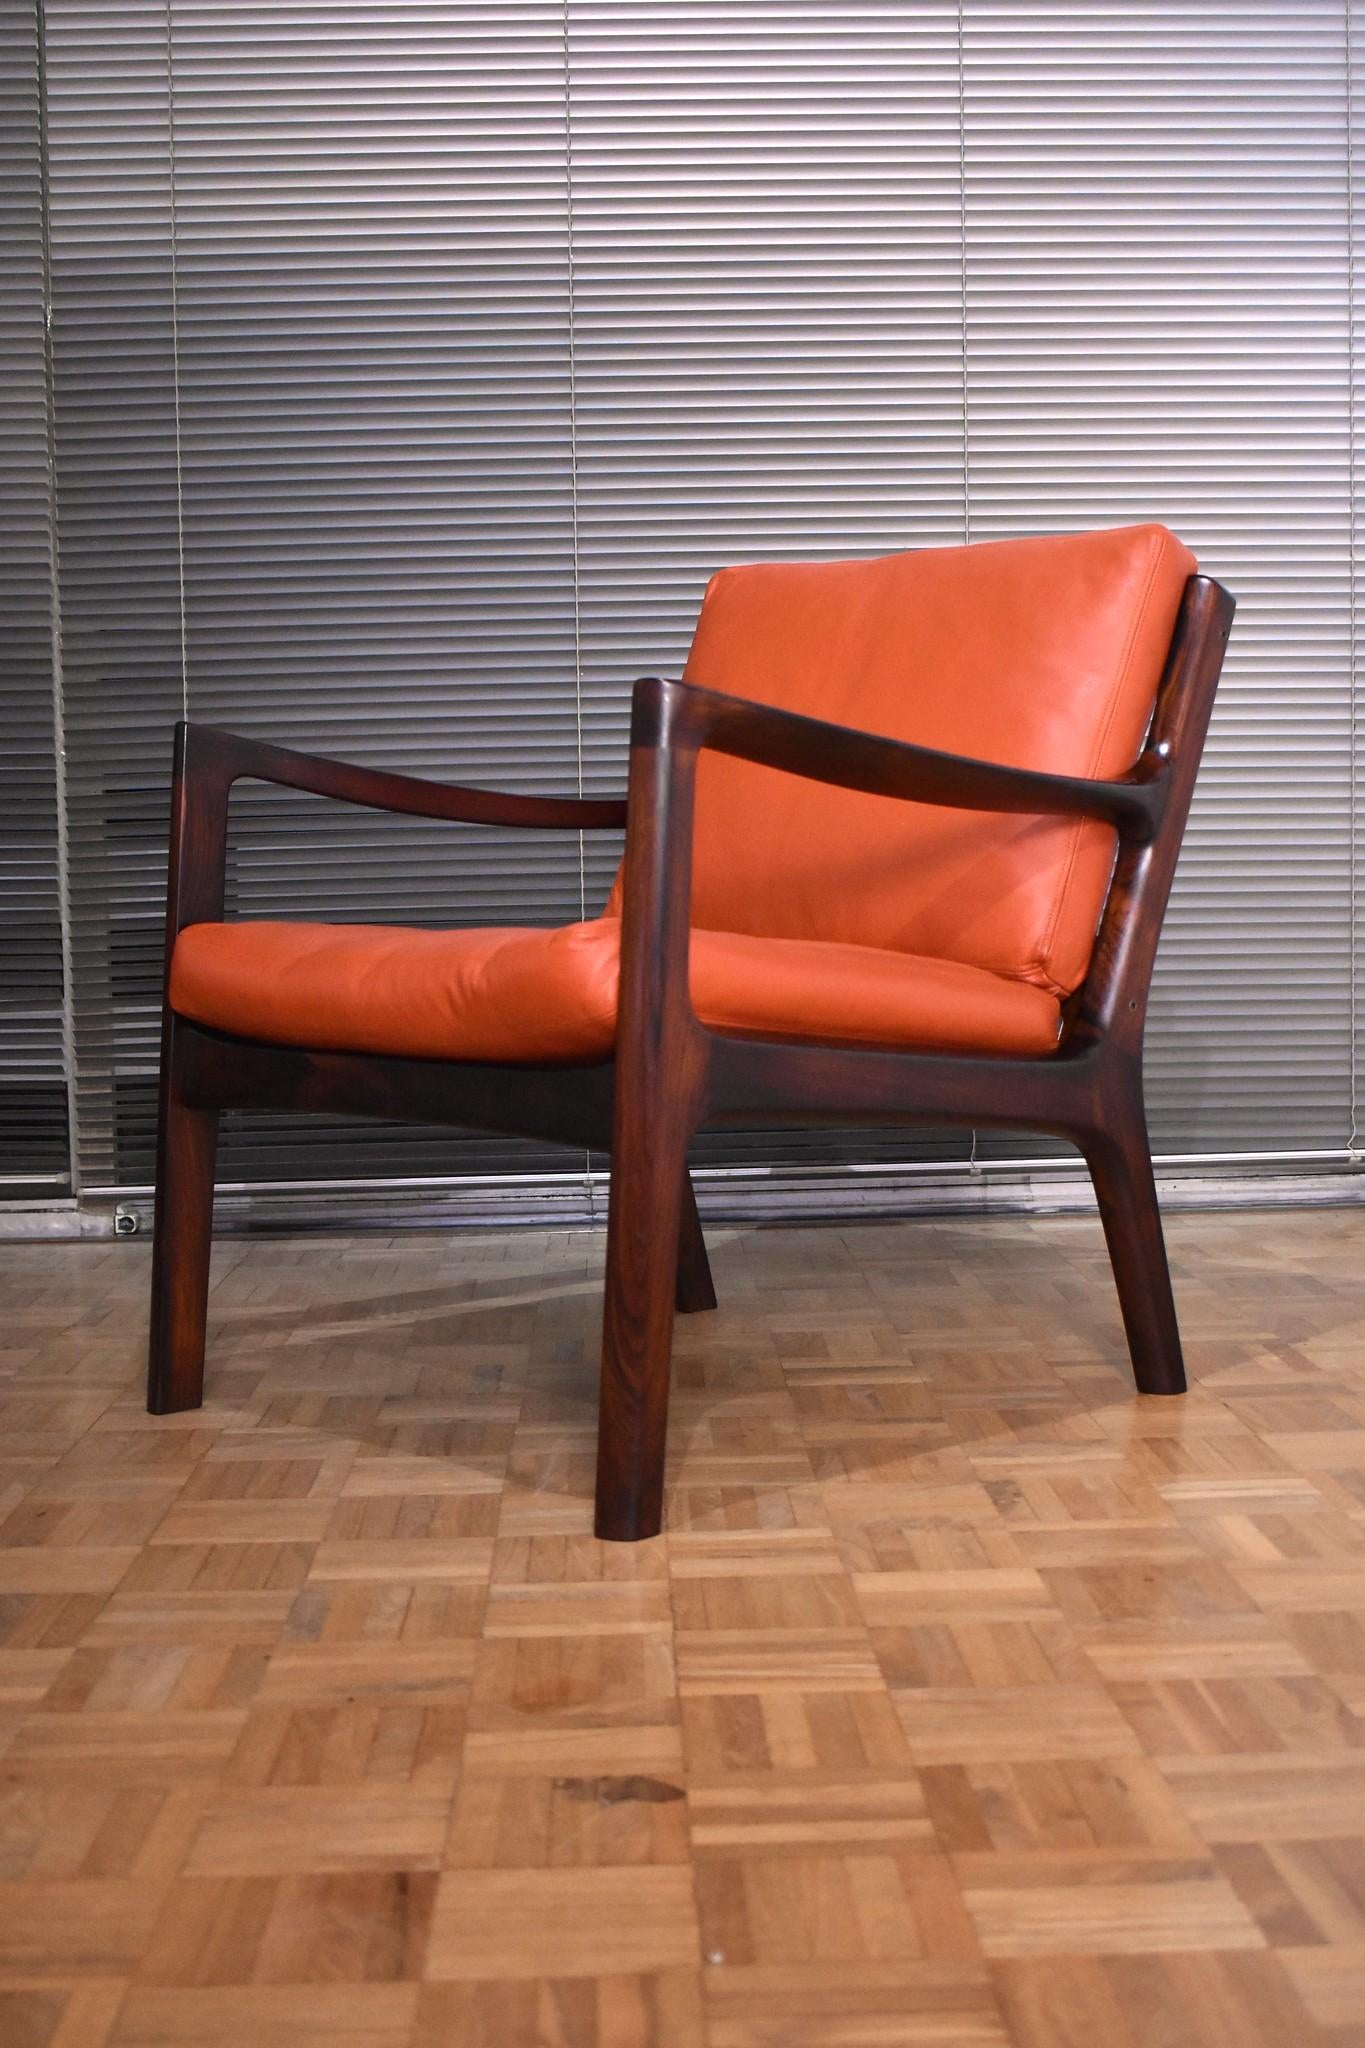 An excellent pair of senator chairs designed by Ole Wanscher for France & Son, Denmark.

Produced with solid Brazilian rosewood this design looks absolutely stunning executed in this timber. Only a relatively small amount of chairs were produced